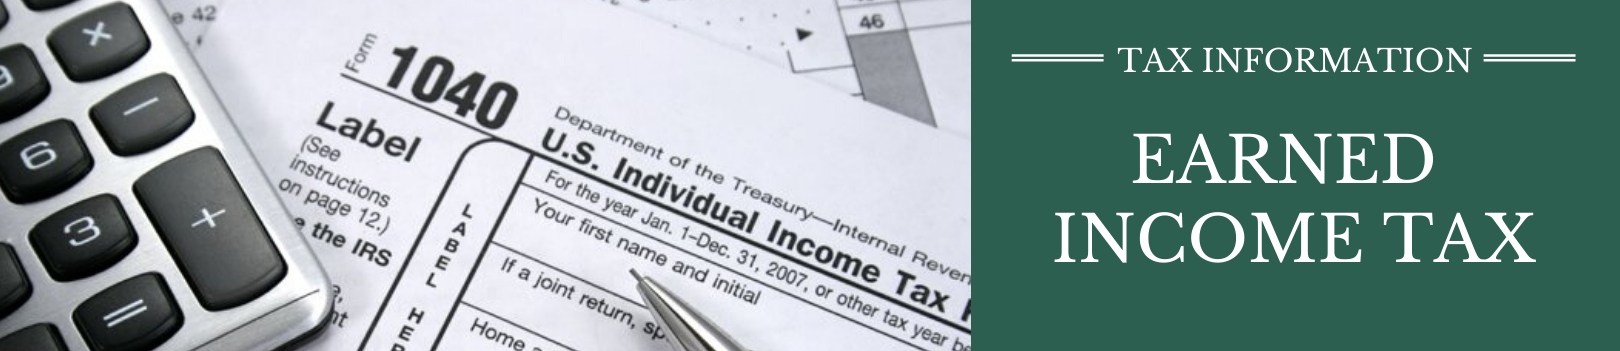 pa lower merion township local earned income tax rate